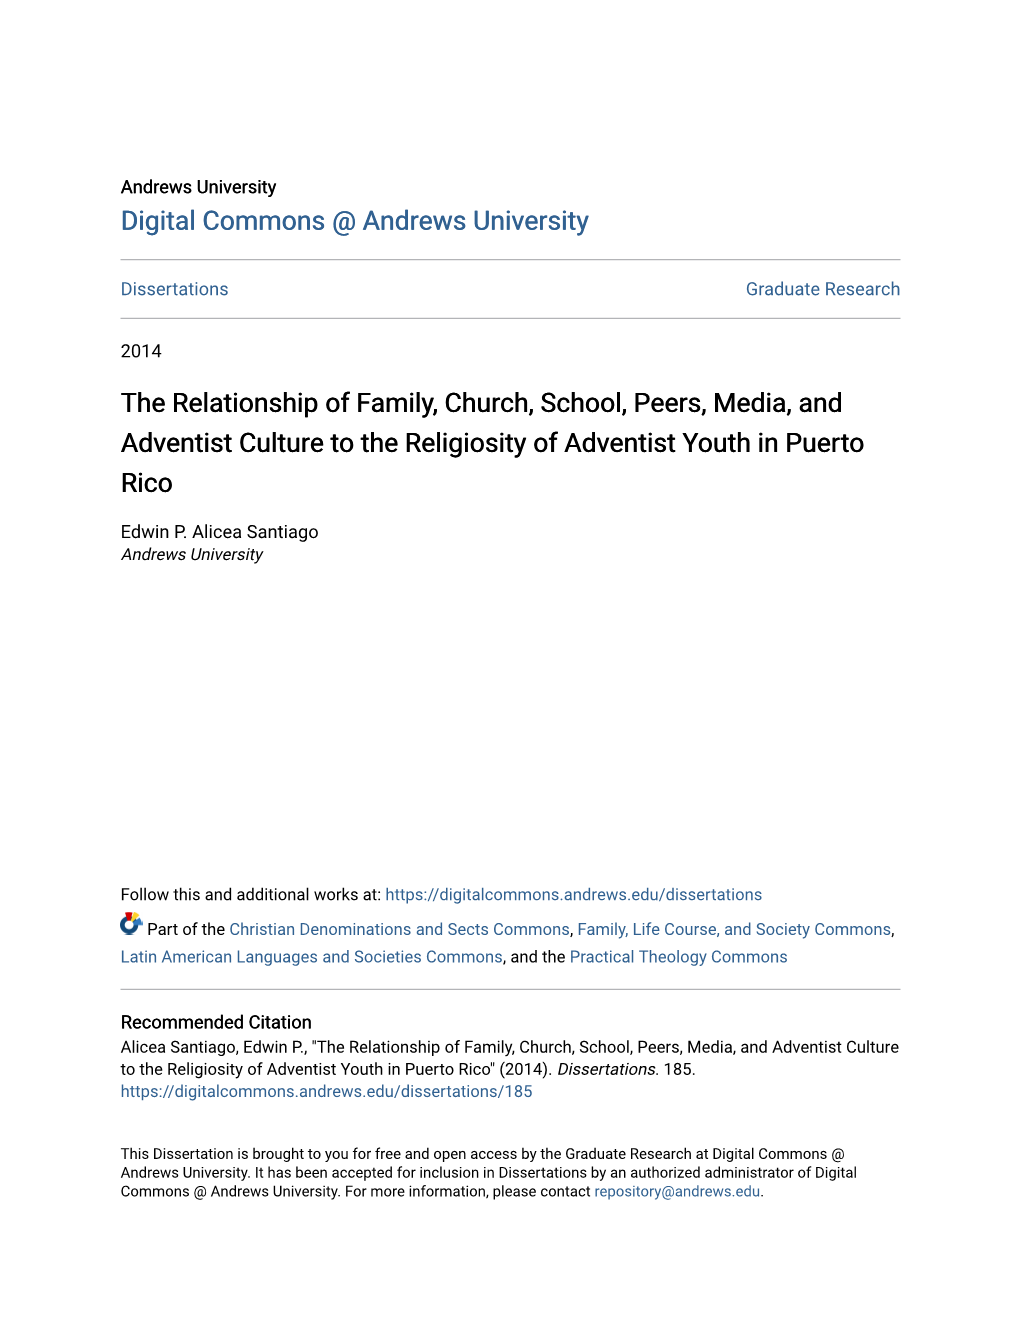 The Relationship of Family, Church, School, Peers, Media, and Adventist Culture to the Religiosity of Adventist Youth in Puerto Rico